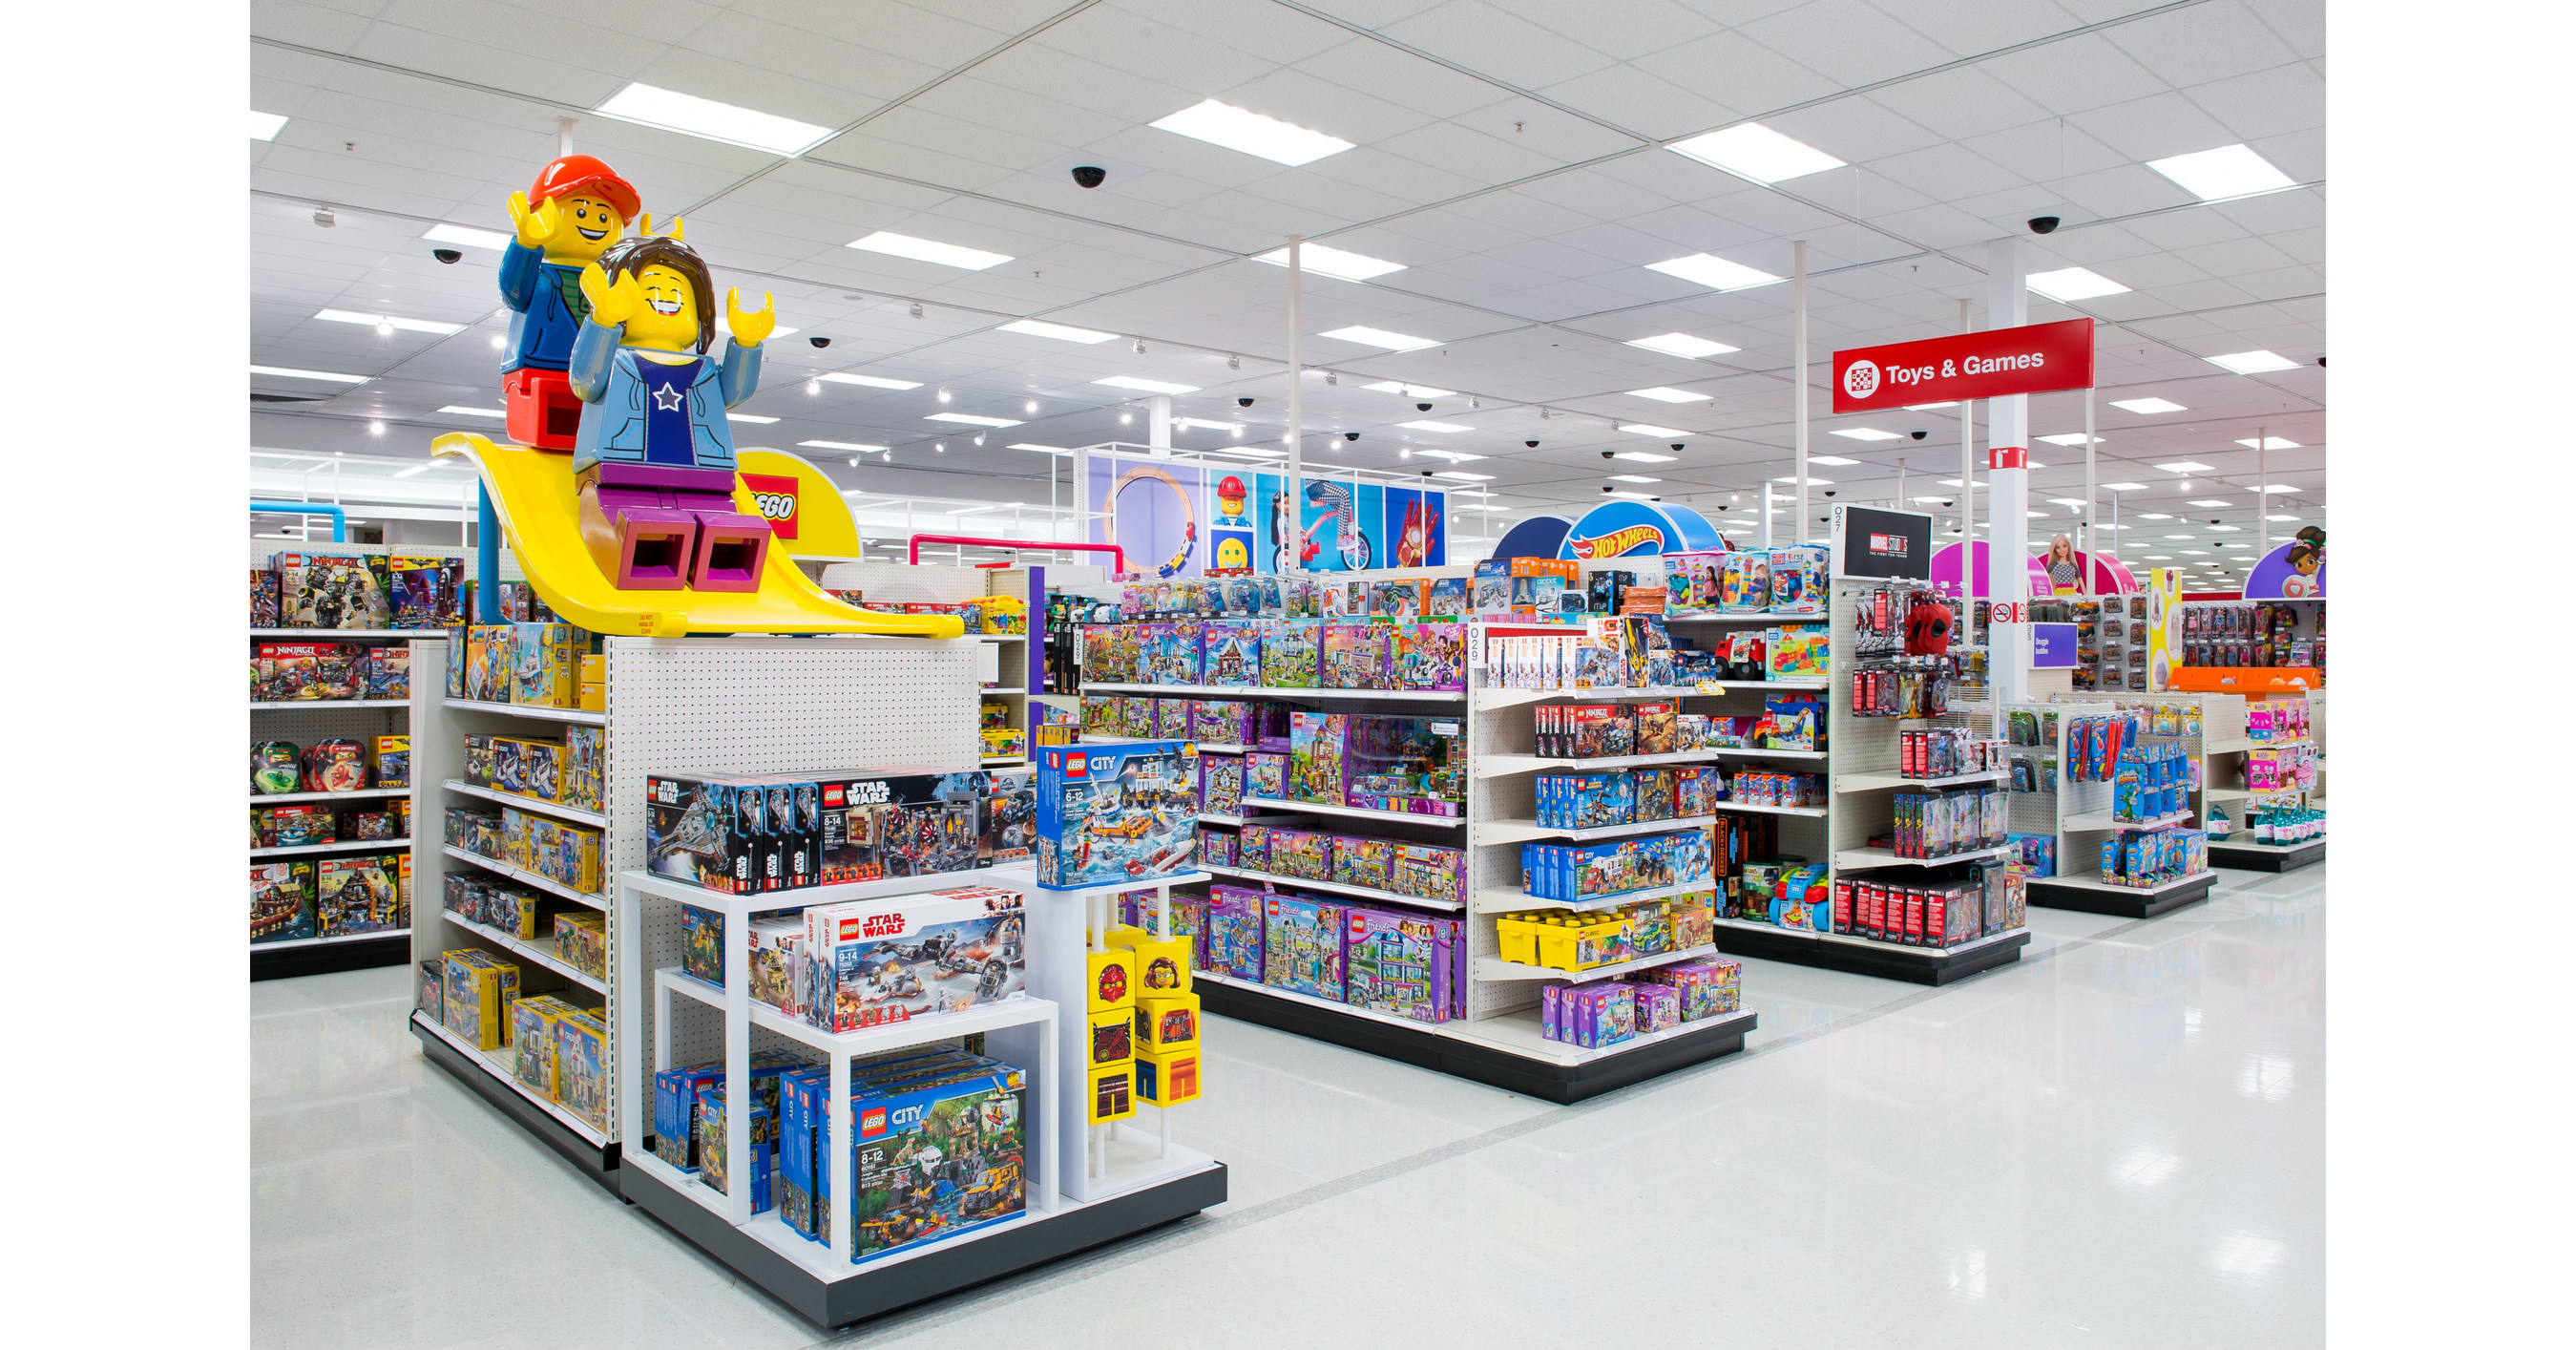 Target Reimagines Toy Experience for the Holidays